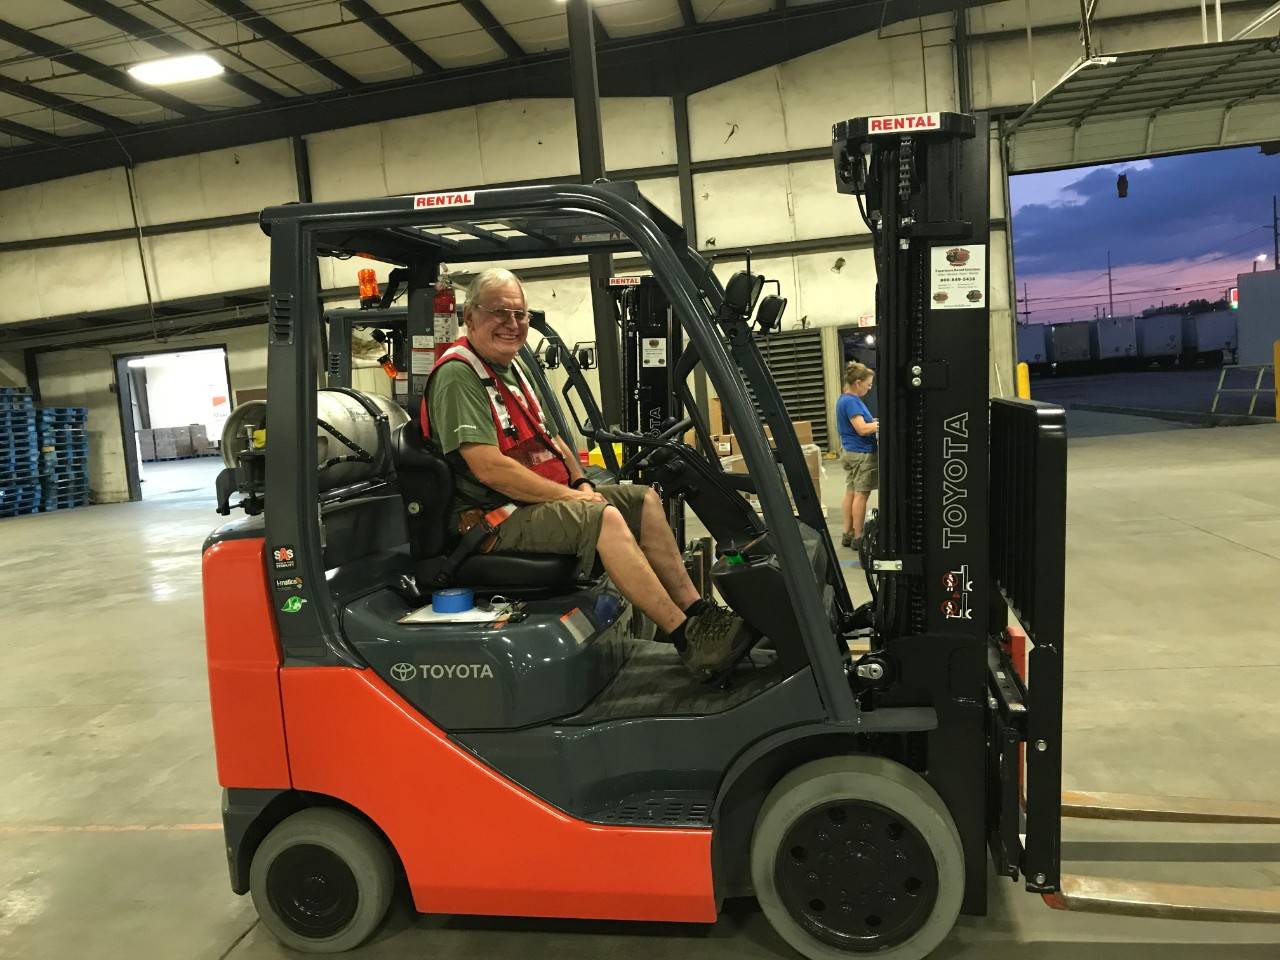 Red Cross volunteer driving a fork lift in a warehouse.